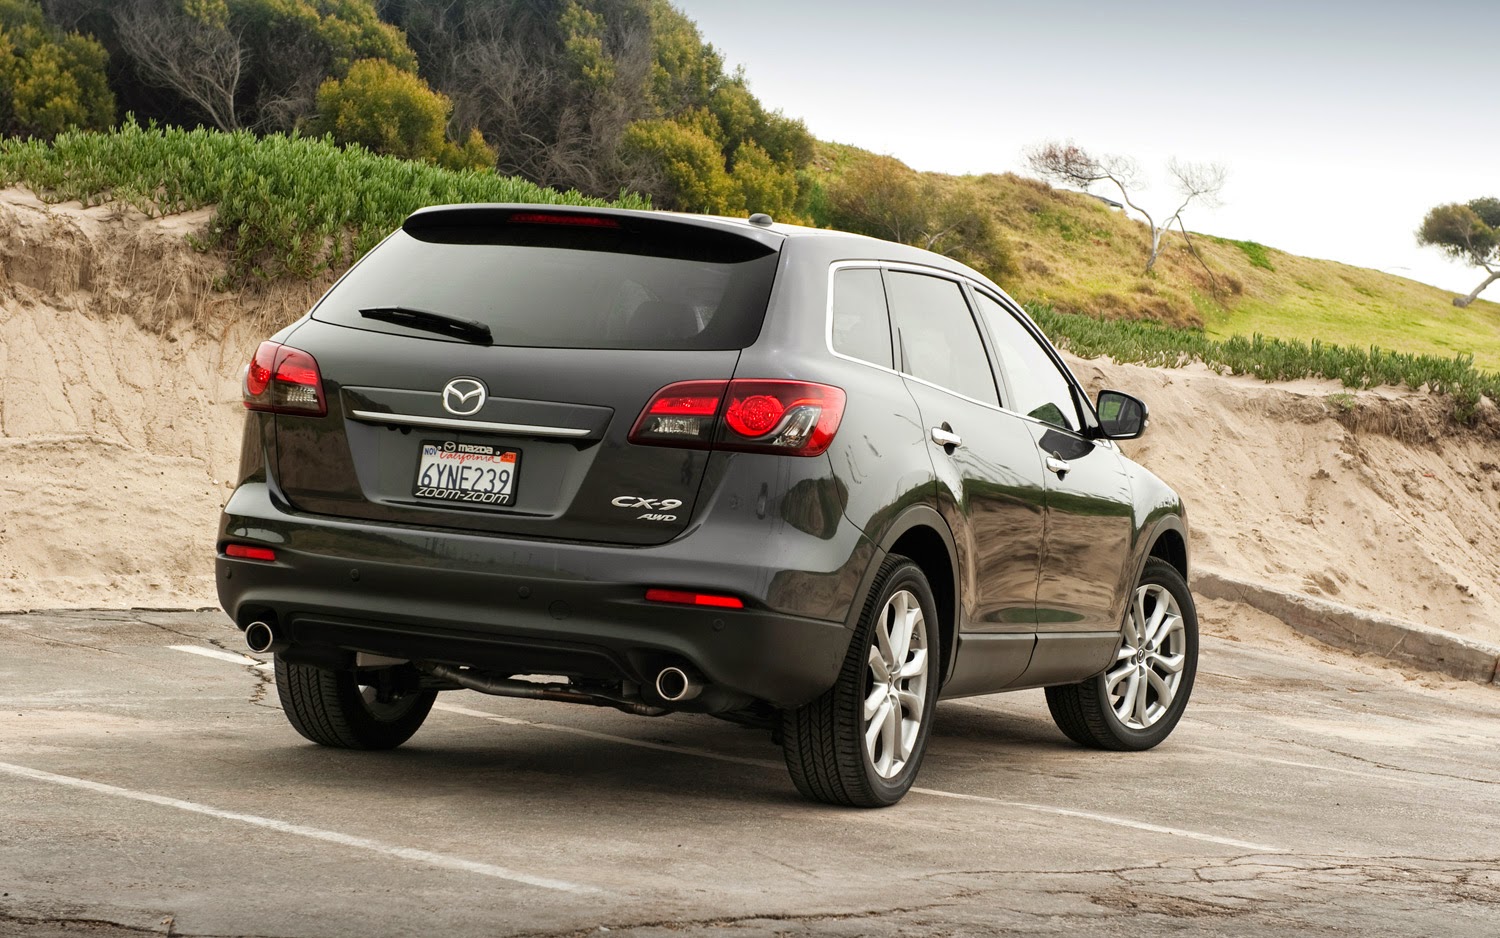 The 2015 Mazda CX-9 Grand Touring: Why You Need It